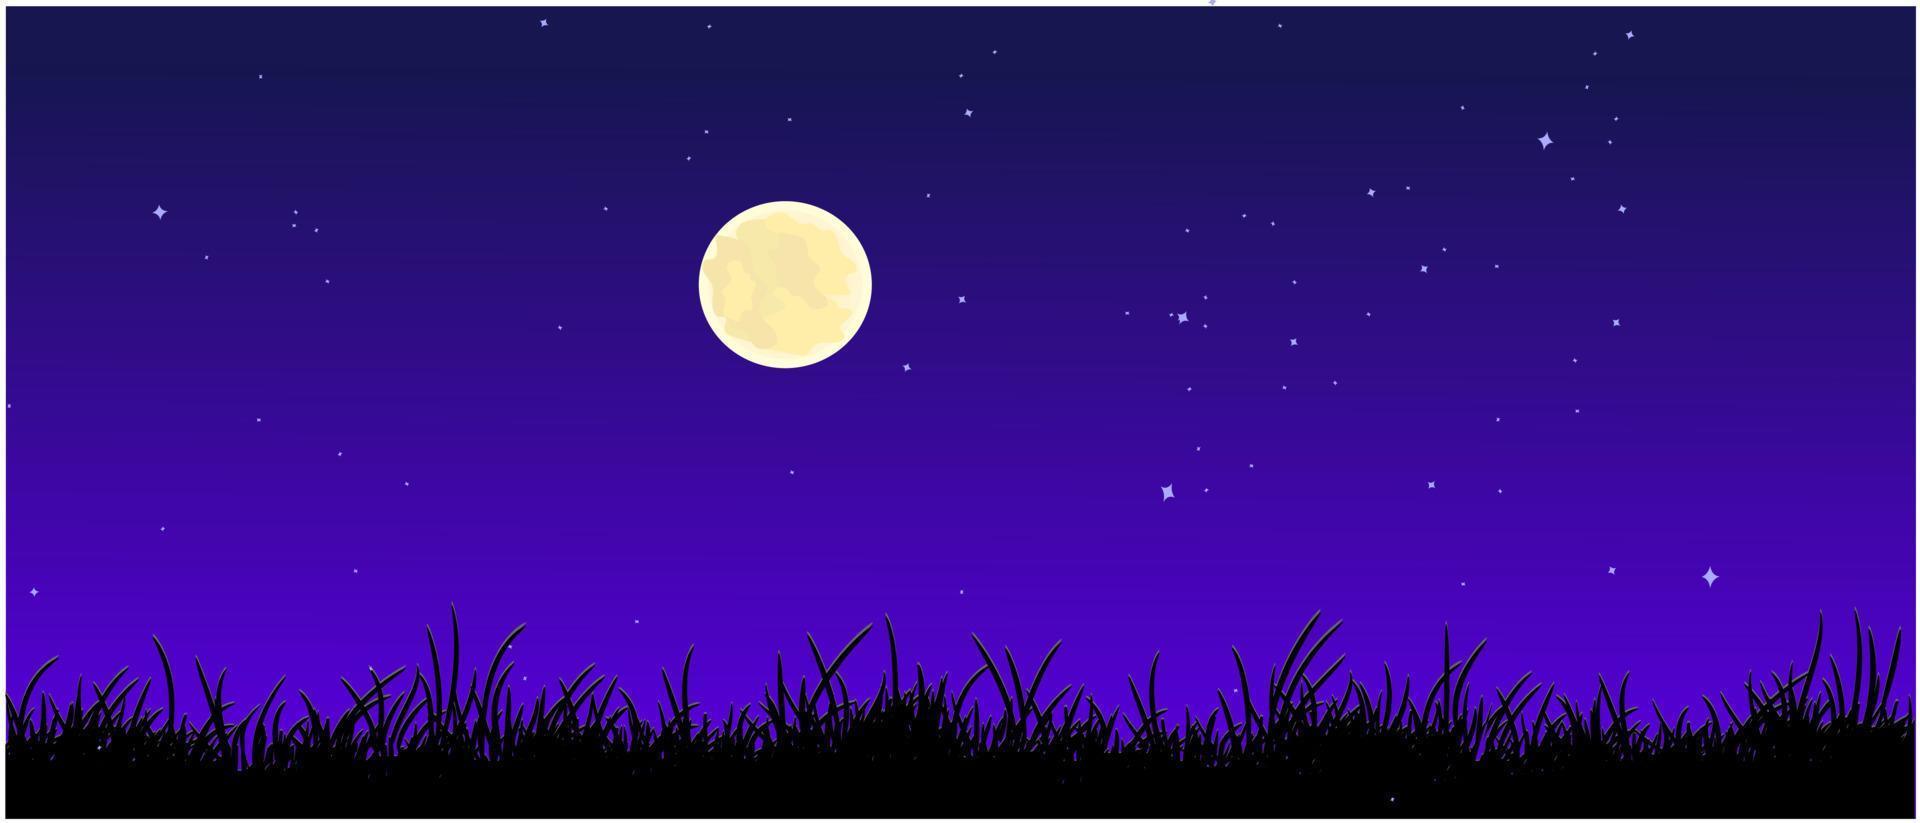 grass night silhouette with stars and moon background, grassland background vector